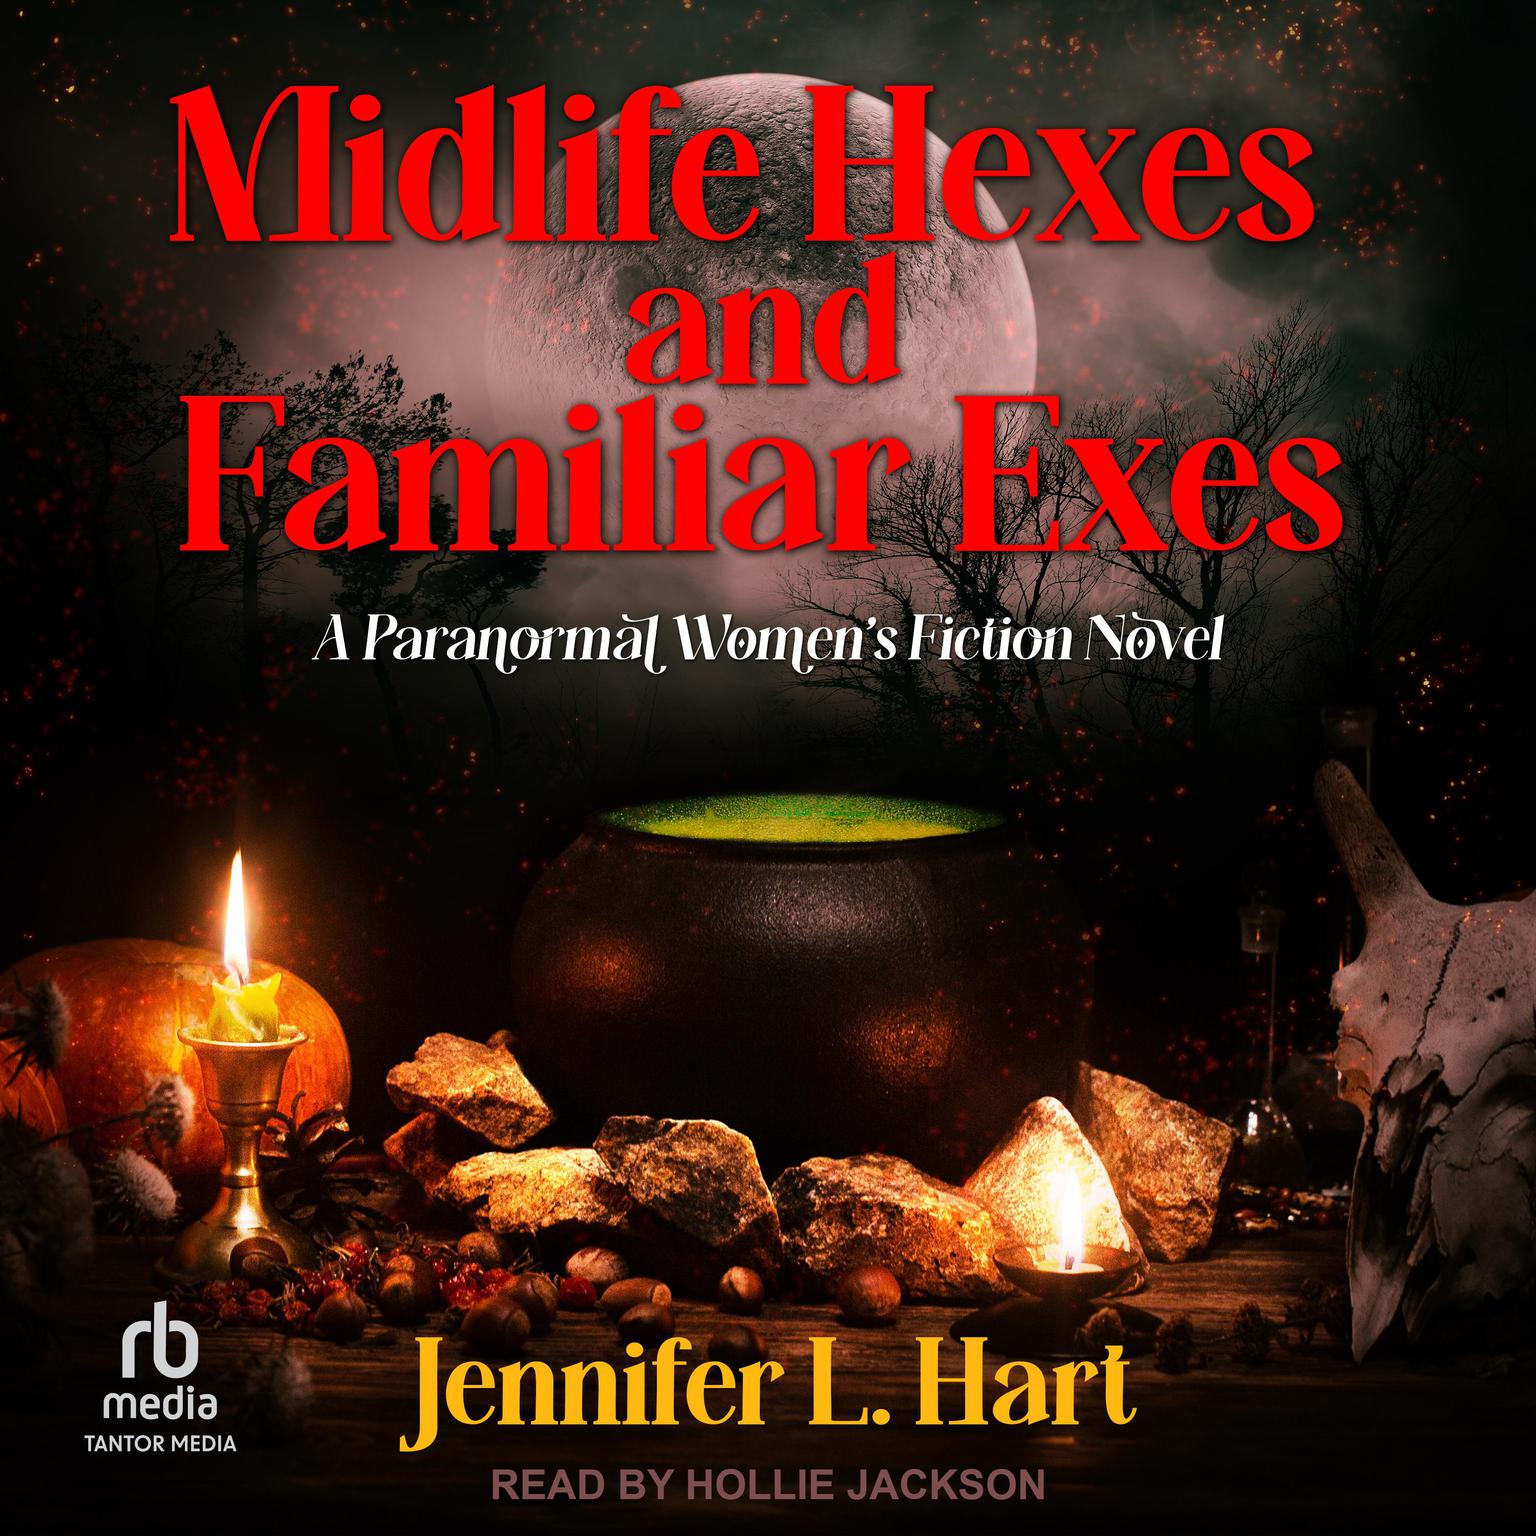 Midlife Hexes and Familiar Exes: A Paranormal Women’s Fiction Novel Audiobook, by Jennifer L. Hart